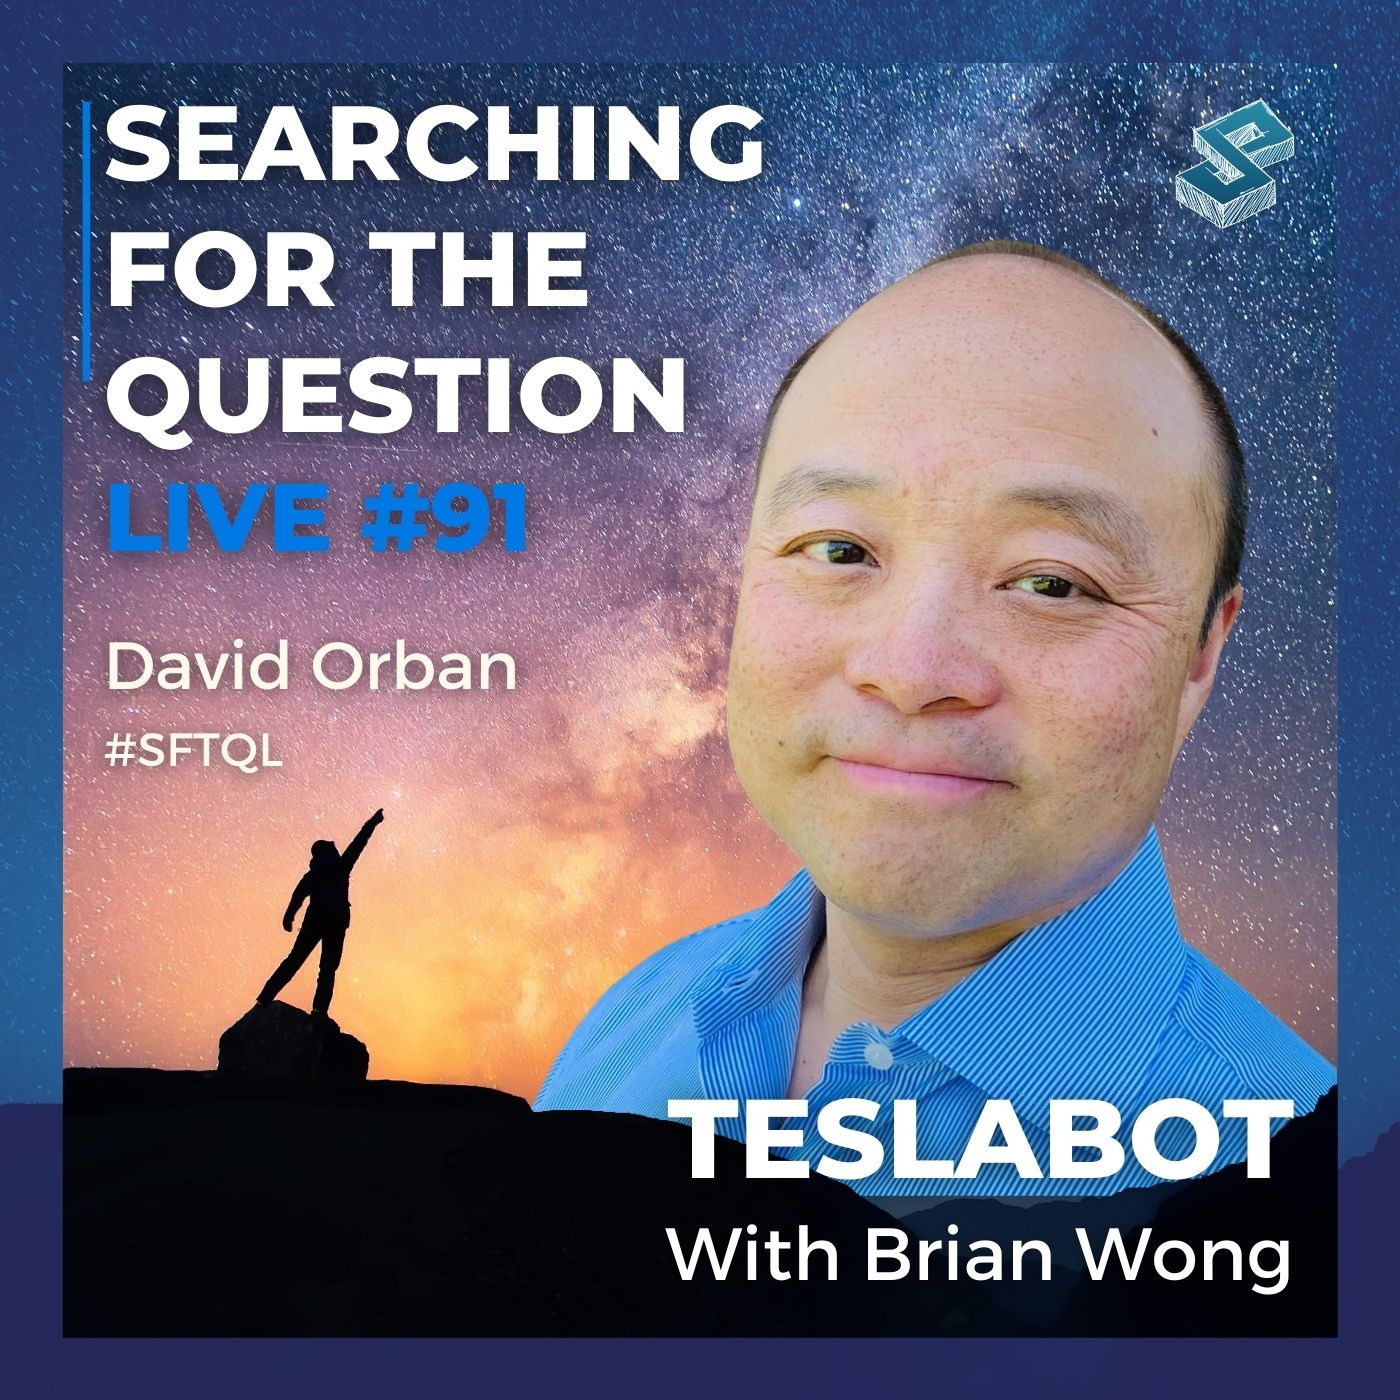 Teslabot with Brian Wang - Searching For The Question Live #91